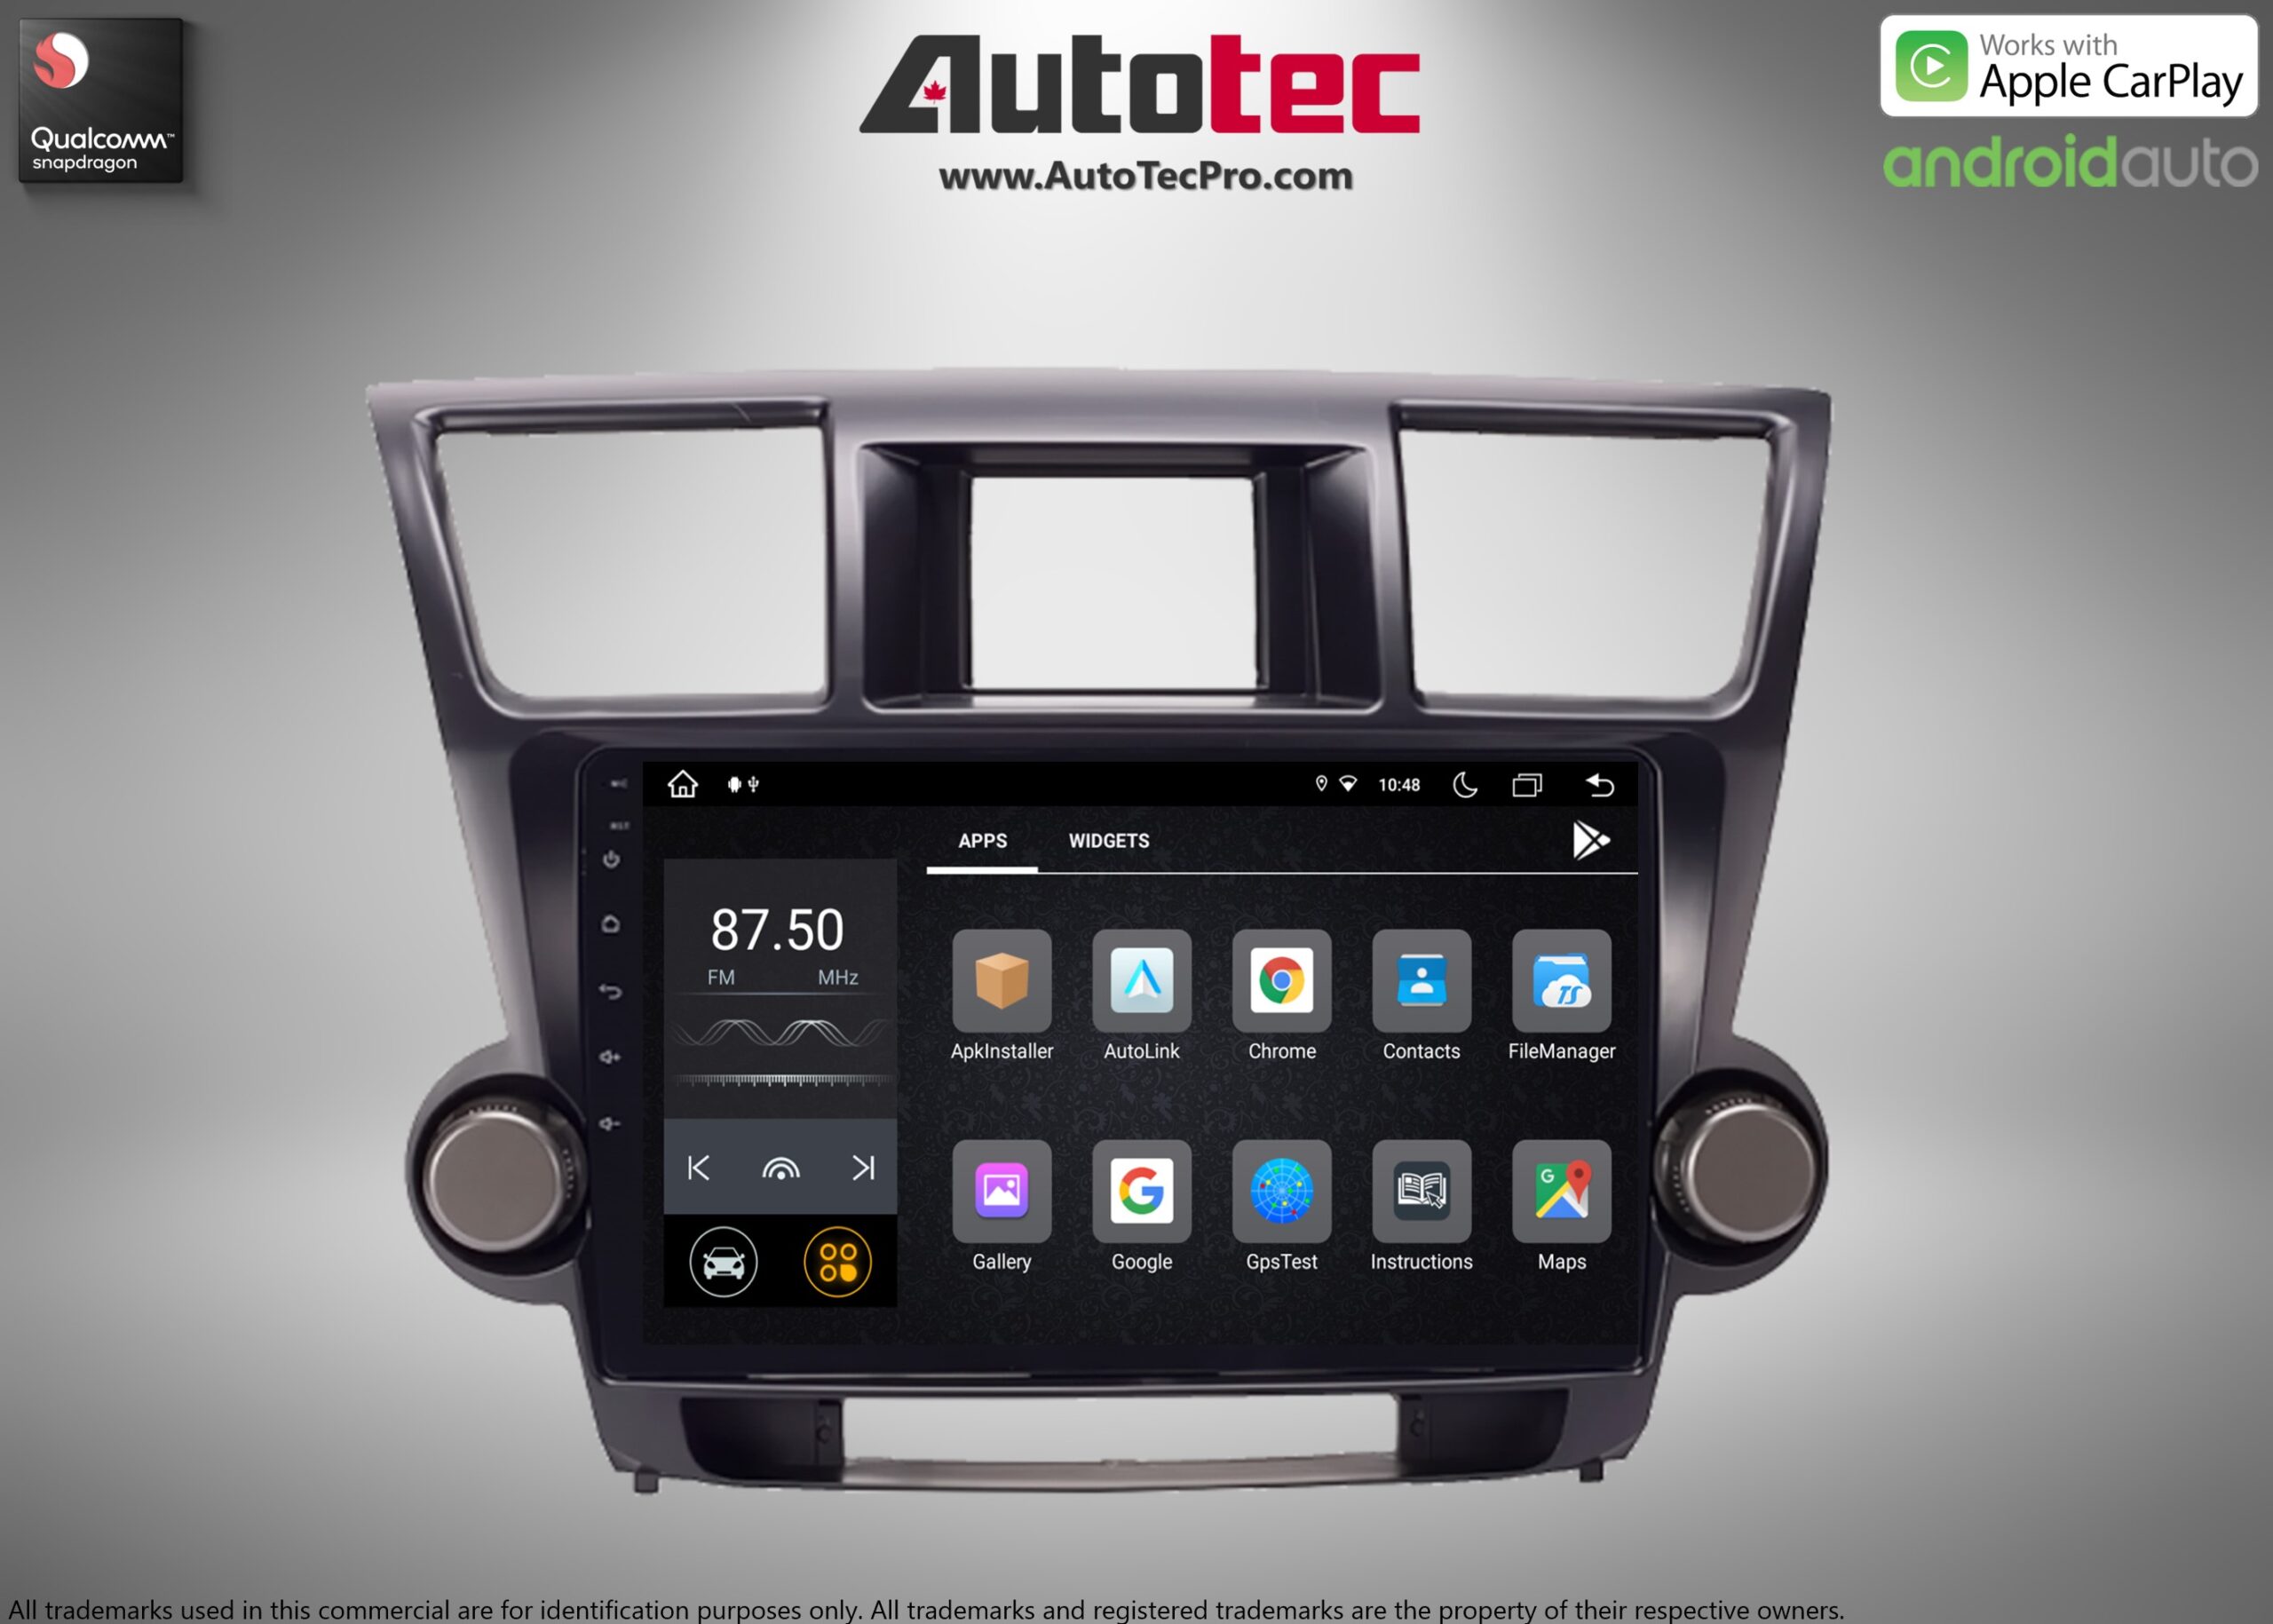 Toyota Highlander (2008 – 2013) 10.1″ HD Touch-Screen Android Navigation System | Android 13 | GPS | BT | WiFi | Camera | CarPlay